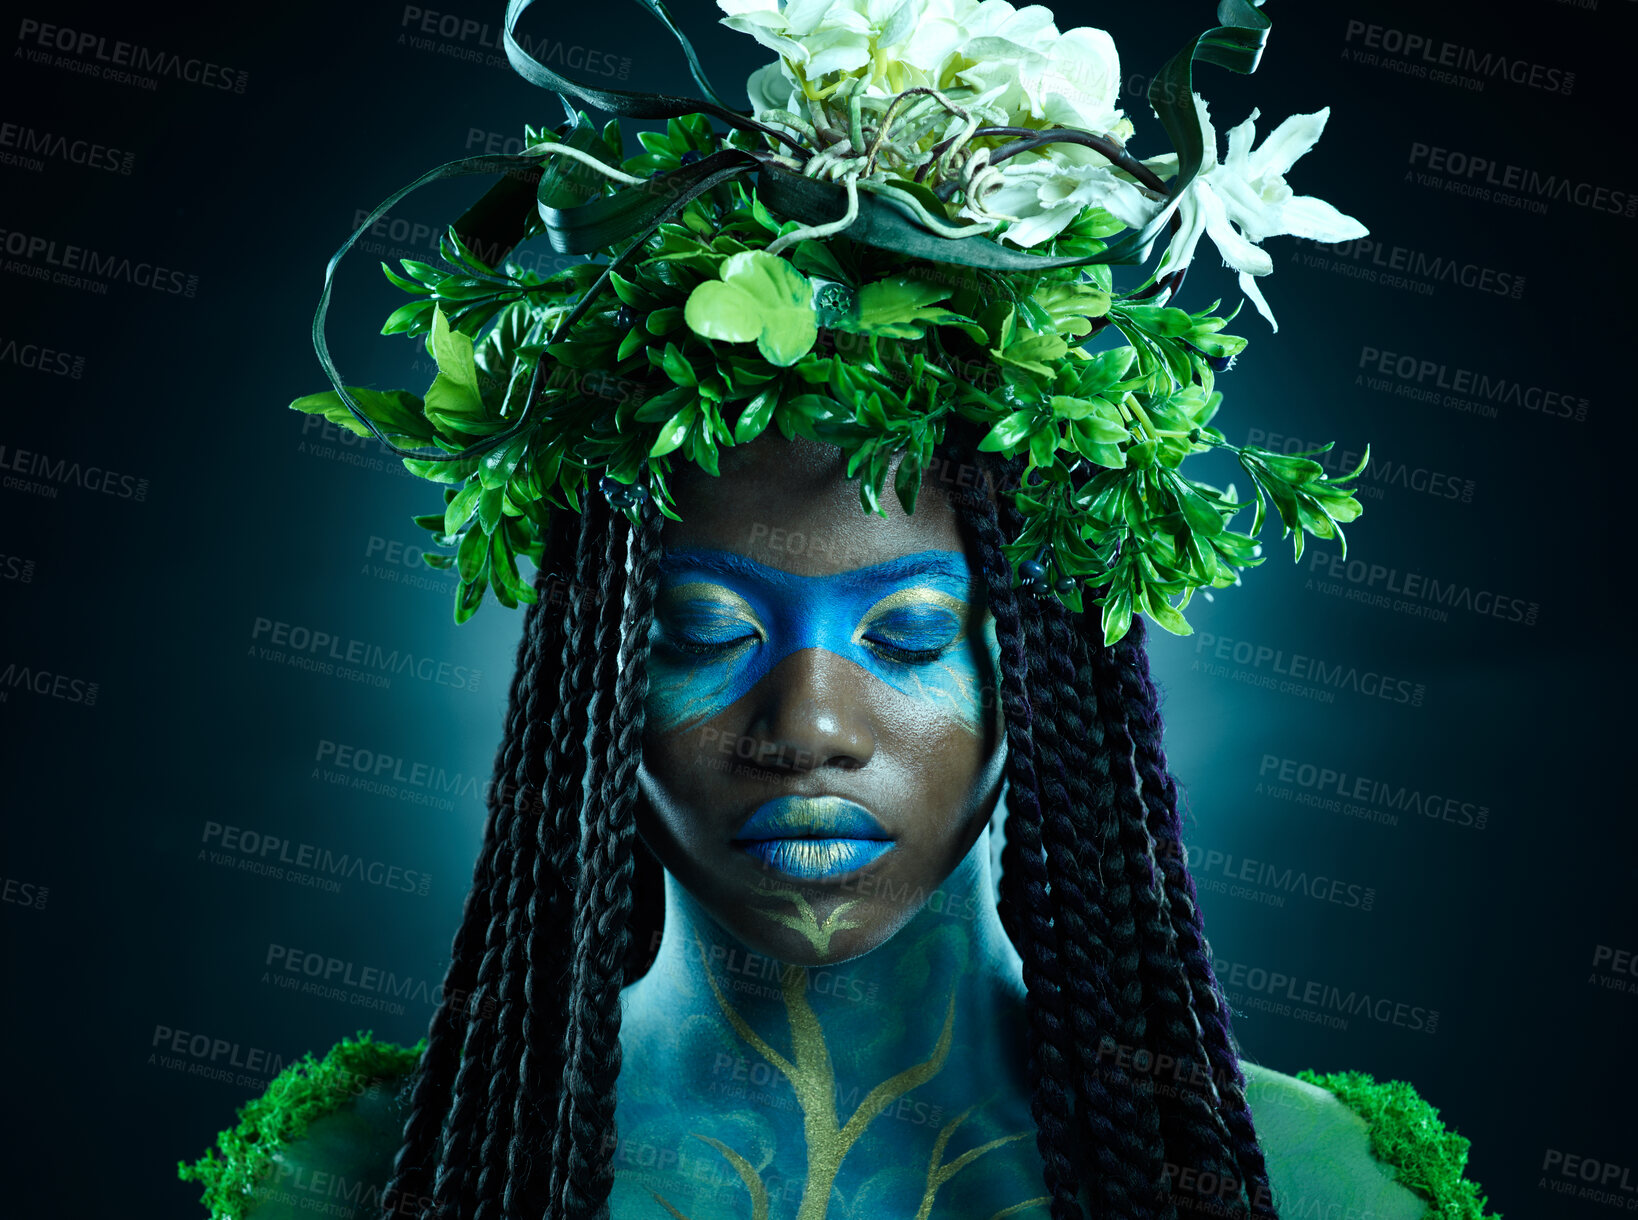 Buy stock photo Black woman, plant crown and beauty of face with makeup on dark background with tropical leafs. Fairy model person or Queen of nature, ecology and sustainability for freedom art with natural wreath